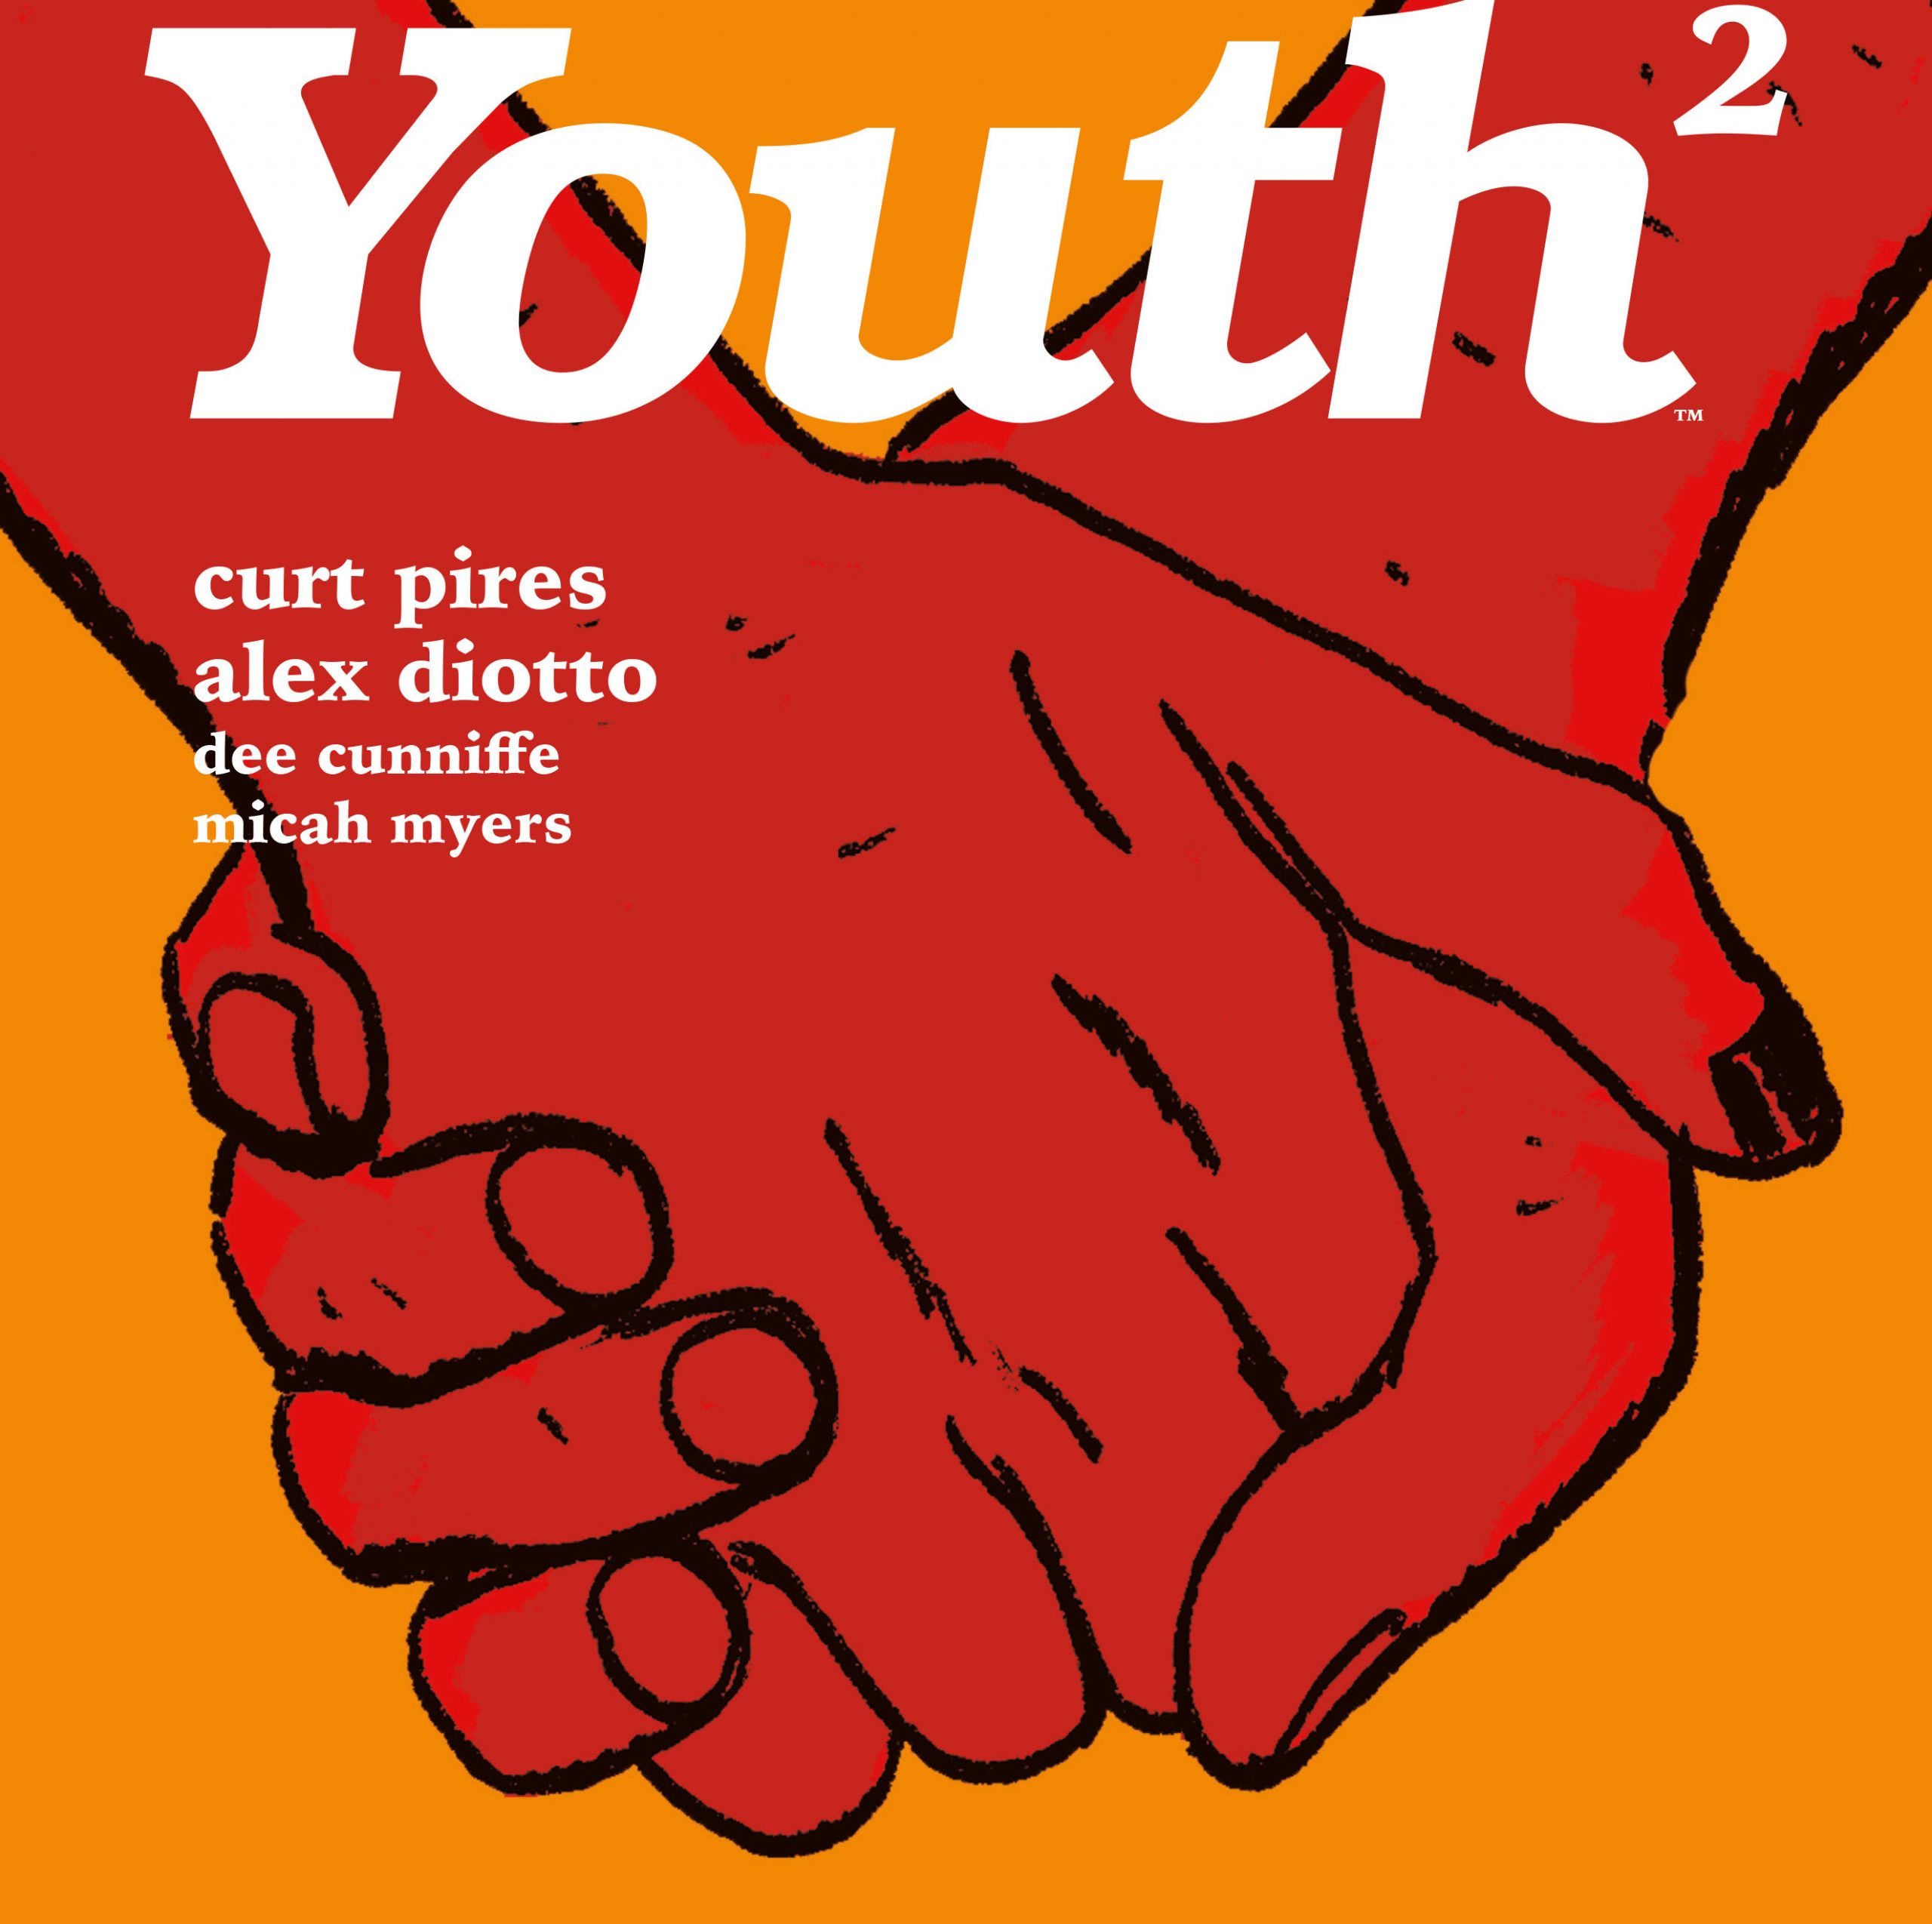 Dark Horse to publish 'Youth Volume 2' in print January 2023